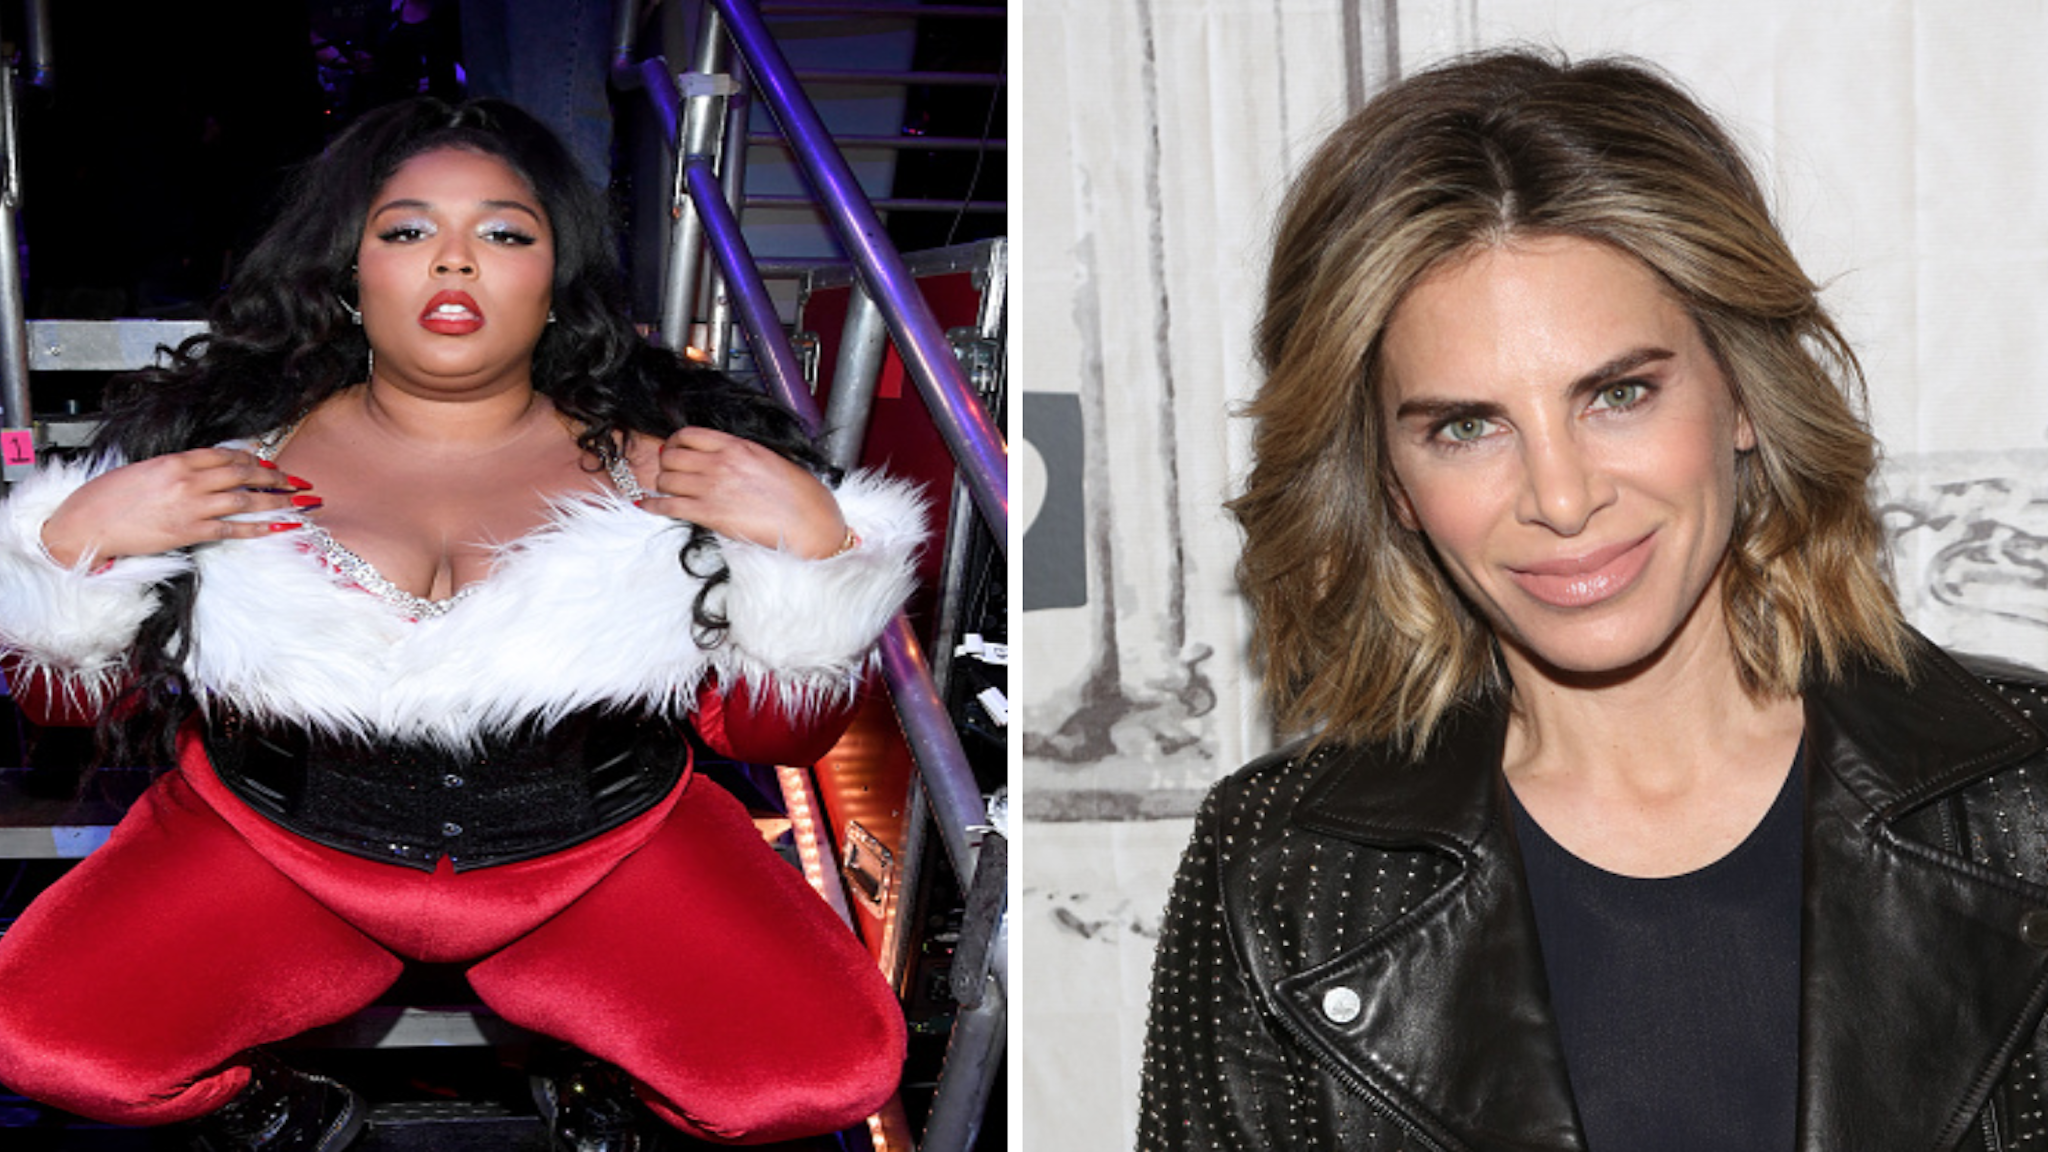 NEW YORK, NEW YORK - DECEMBER 13: Lizzo poses backstage at iHeartRadio's Z100 Jingle Ball 2019 Presented By Capital One on December 13, 2019 in New York City. NEW YORK, NEW YORK - JANUARY 07: Jillian Michaels attends Build Series to discuss her new app "My Fitness by Jillian Michaels" at Build Studio on January 07, 2020 in New York City.